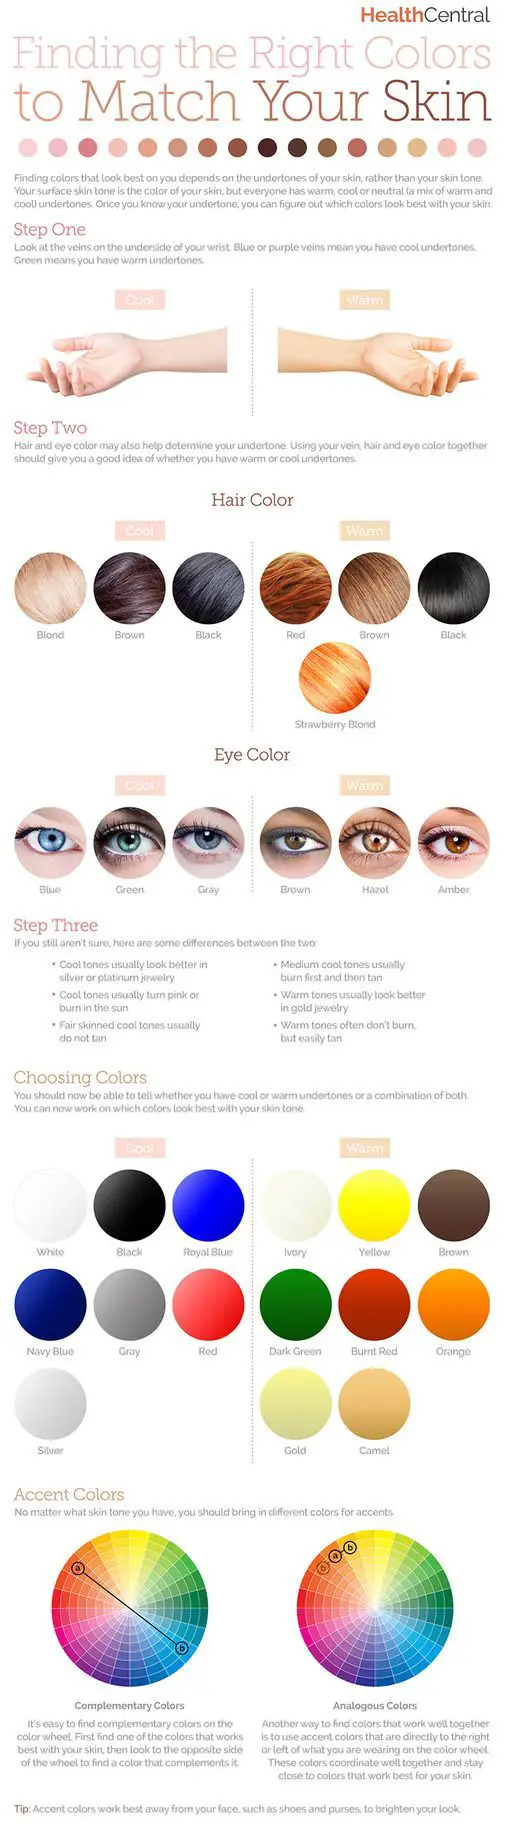 Finding the Right Colors to Match Your Skin (INFOGRAPHIC) - Skin Care